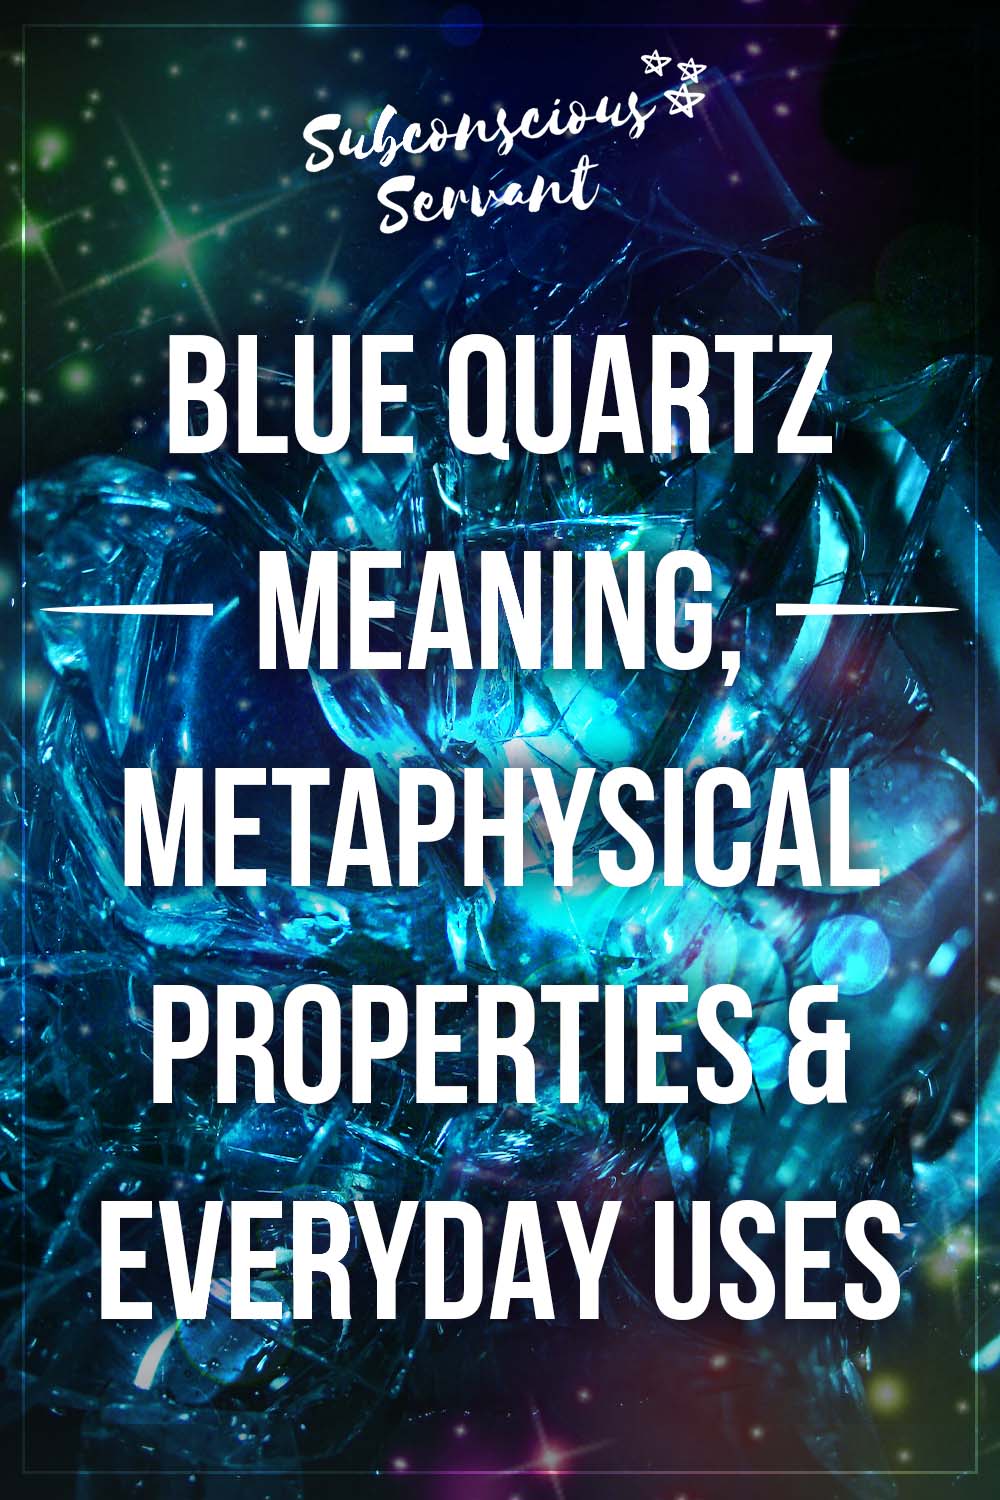 Blue Quartz Meaning, Metaphysical Properties & Everyday Uses